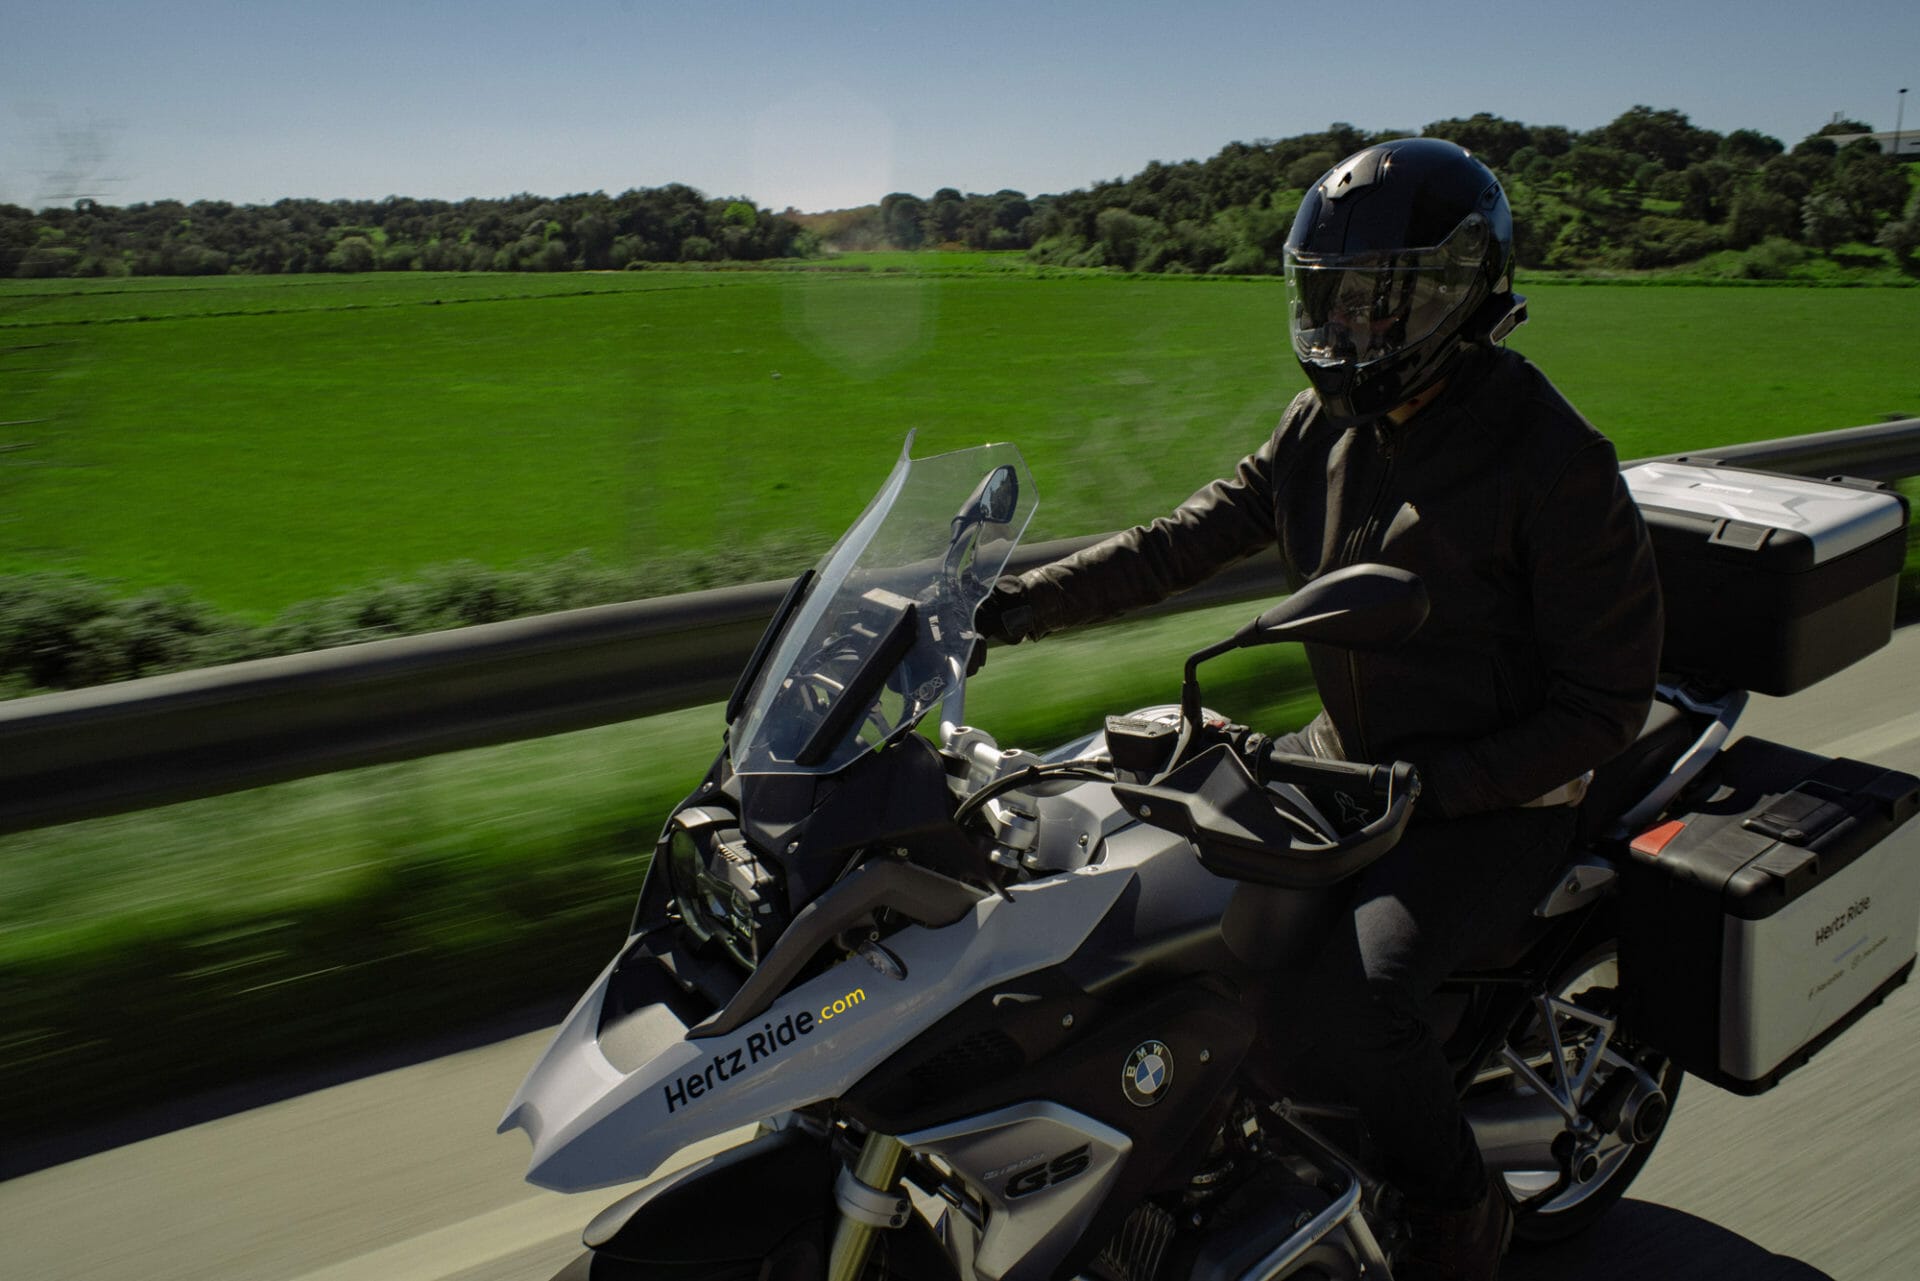 Hertz Ride now also lends motorcycles in the US